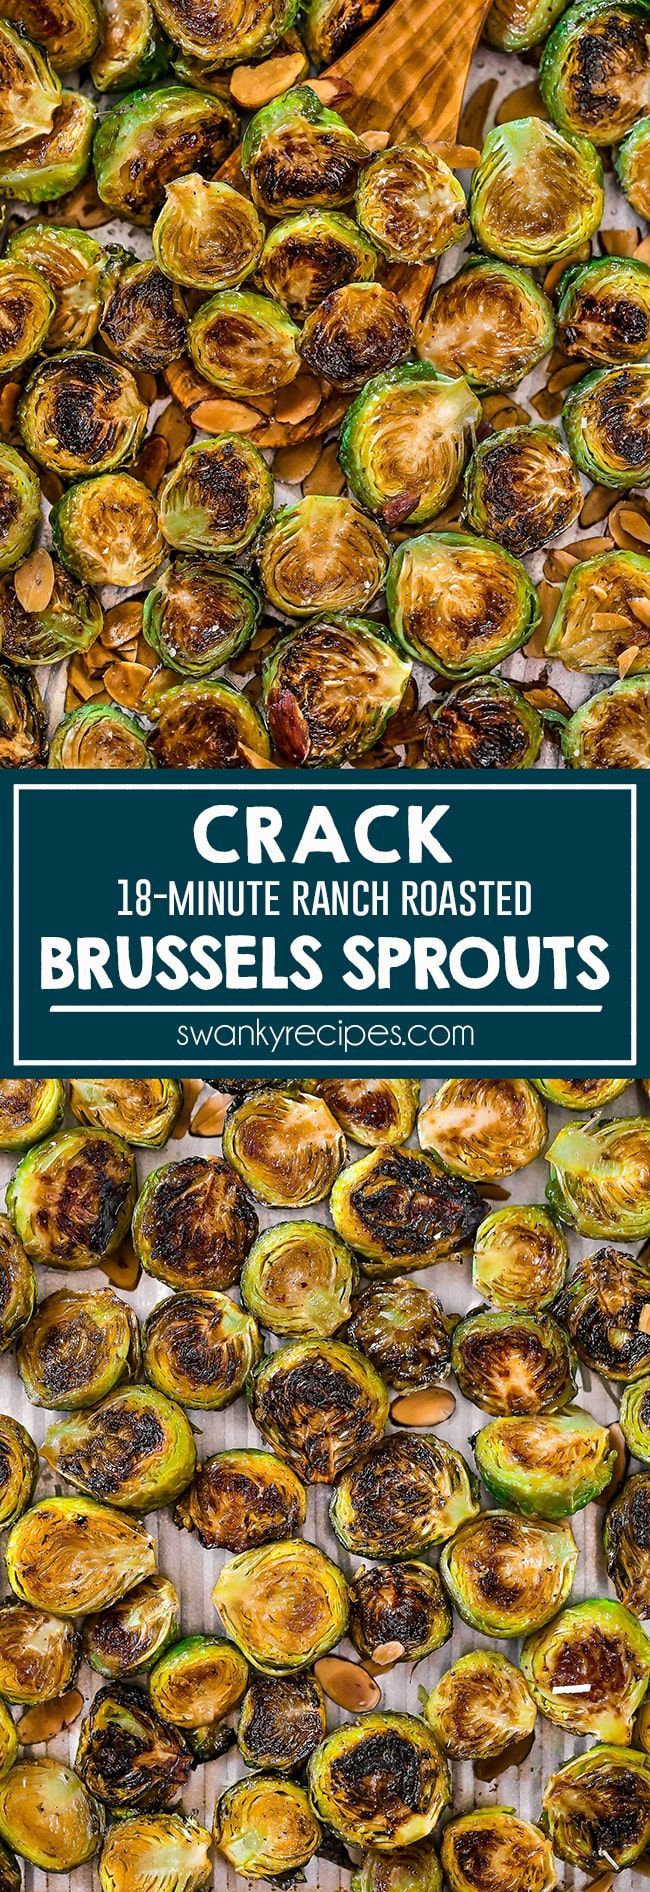 Crack Brussels Sprouts {The Best Roasted Brussels Sprouts} - Swanky Recipes -   19 healthy recipes Sides veggies ideas